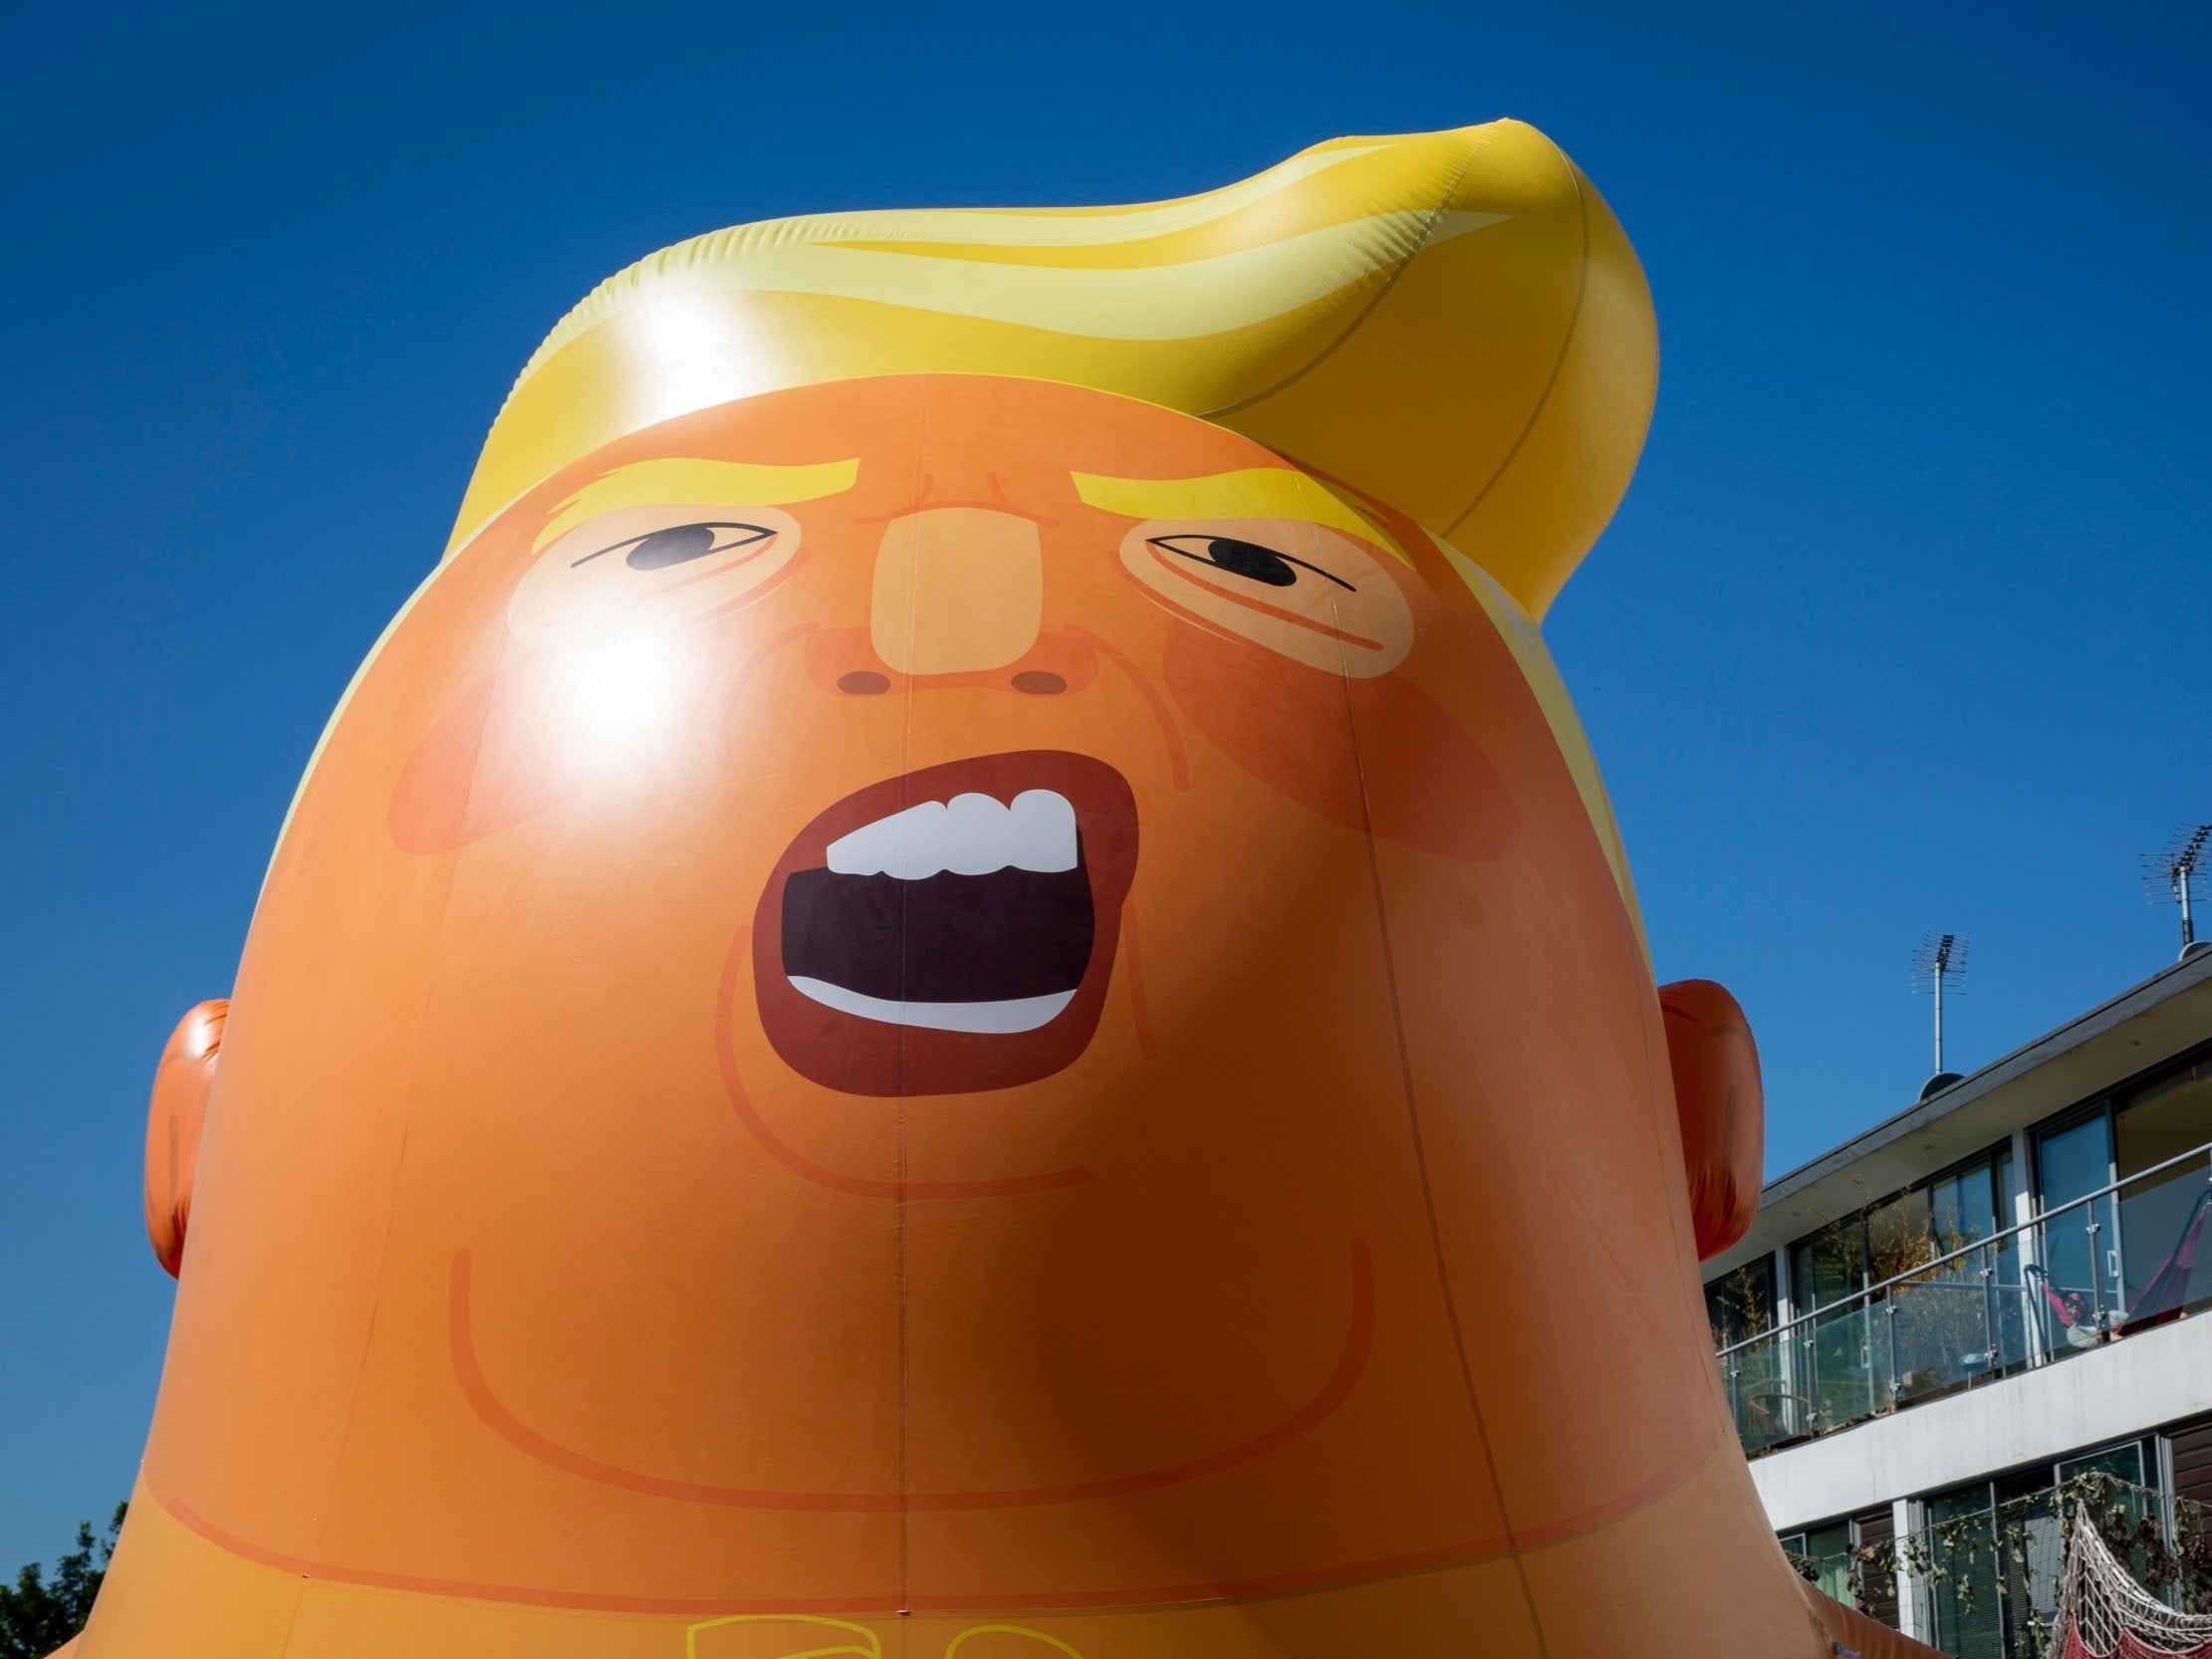 The orange balloon featured at anti-Trump protests in London